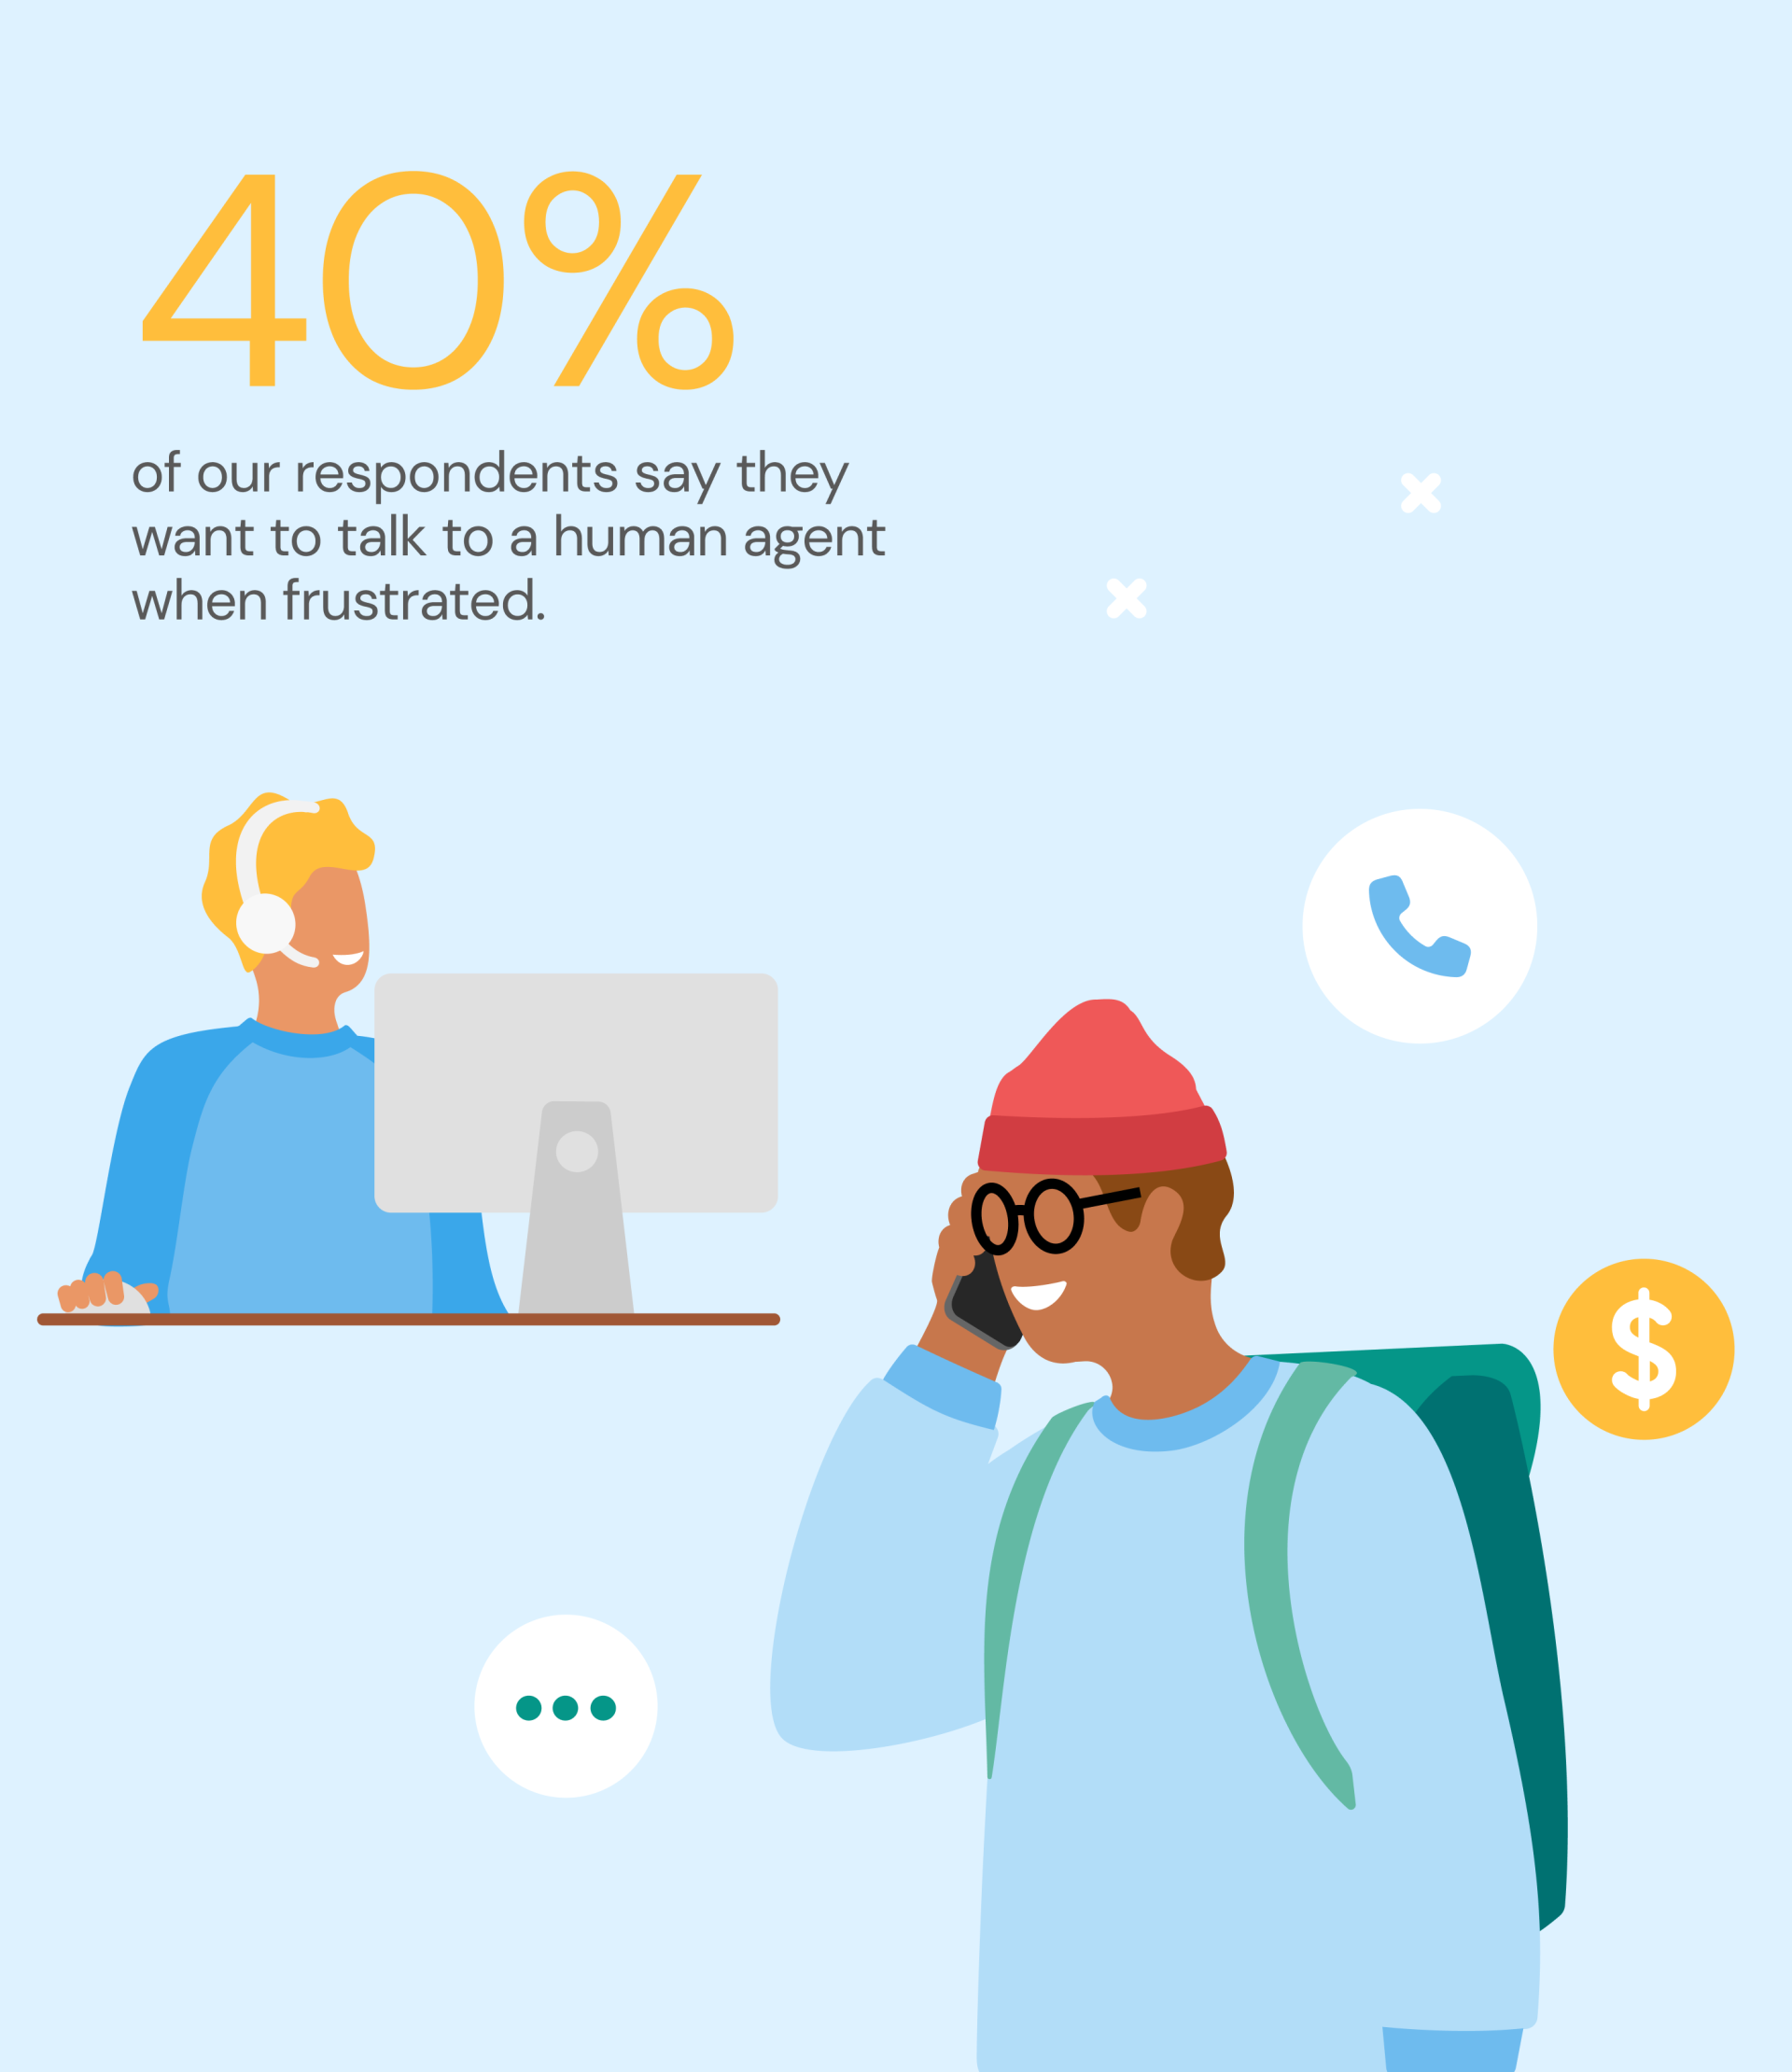 Banking statistic: 40% of consumers want to talk to a human agent when frustrated